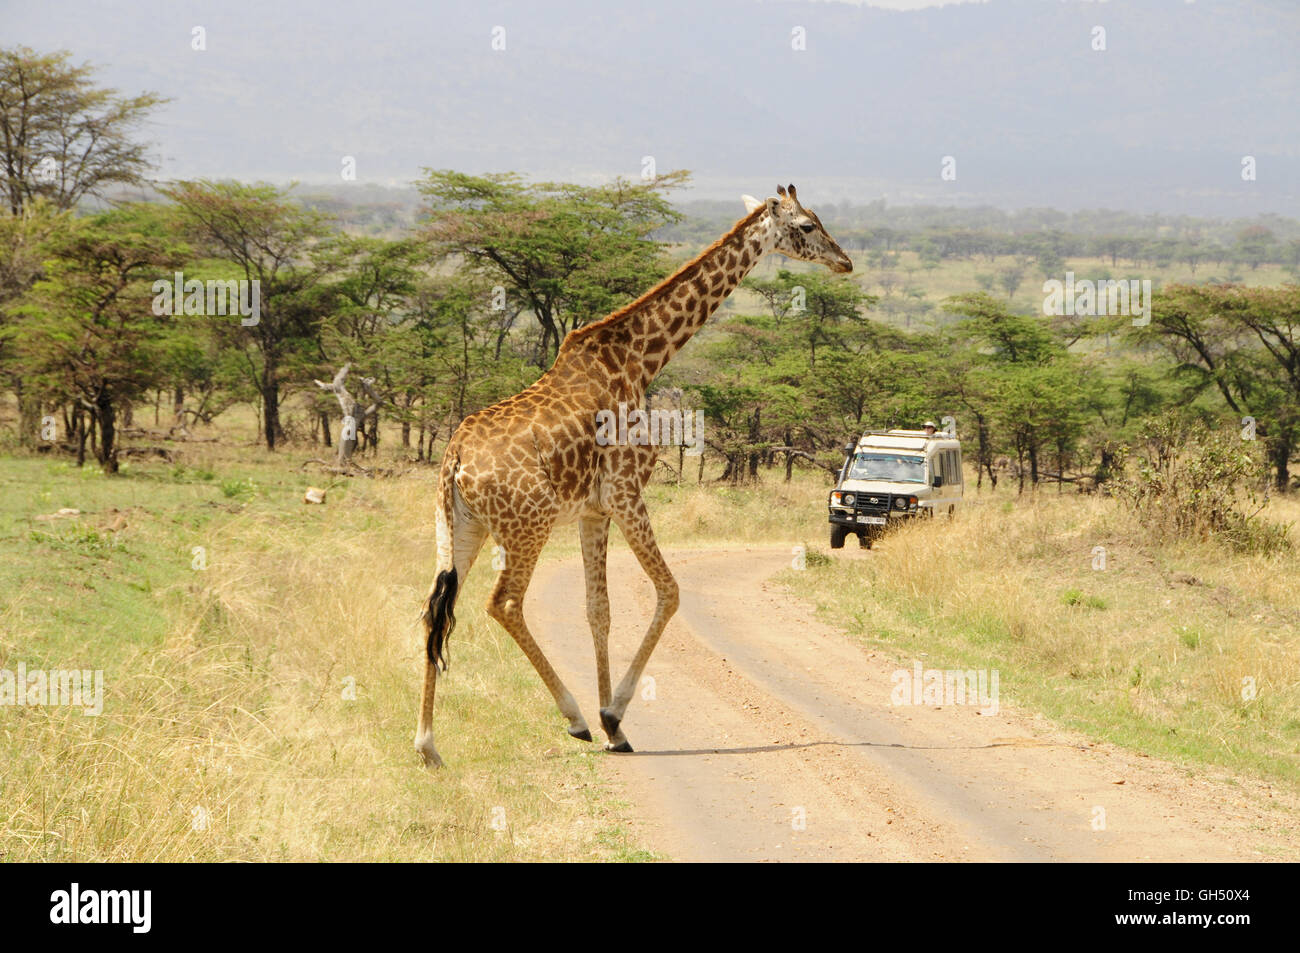 zoology / animals, mammal (mammalia), giraffe (Giraffa camelopardalis tippelskirchi) crossing dirt road in front of a car, Serengeti National Park, Tanzania, Africa, Additional-Rights-Clearance-Info-Not-Available Stock Photo